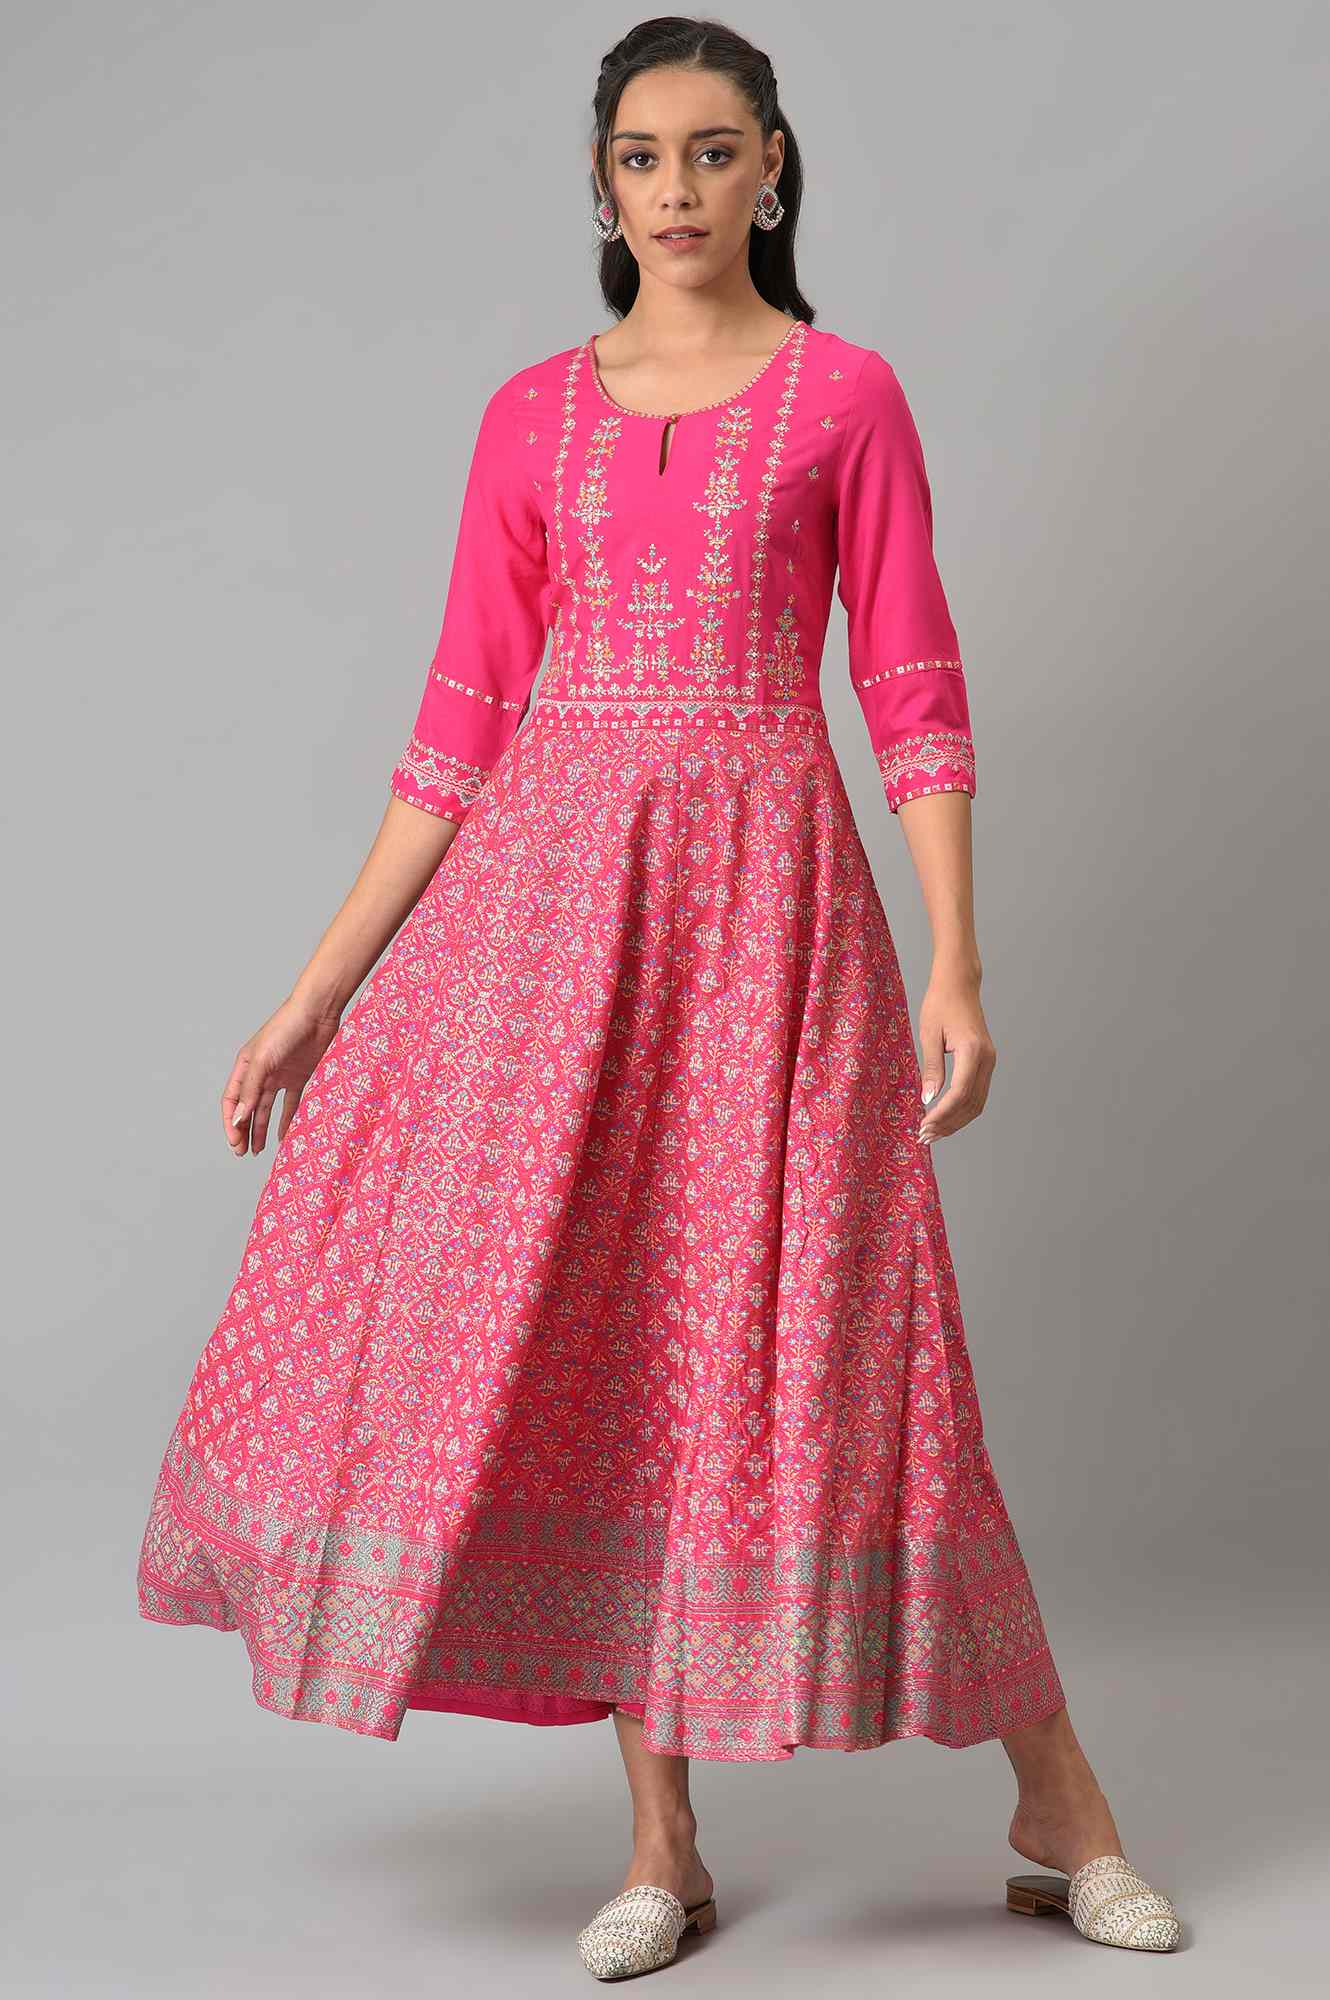 Bright Rose Pink Glitter Printed Dress With Embroidery